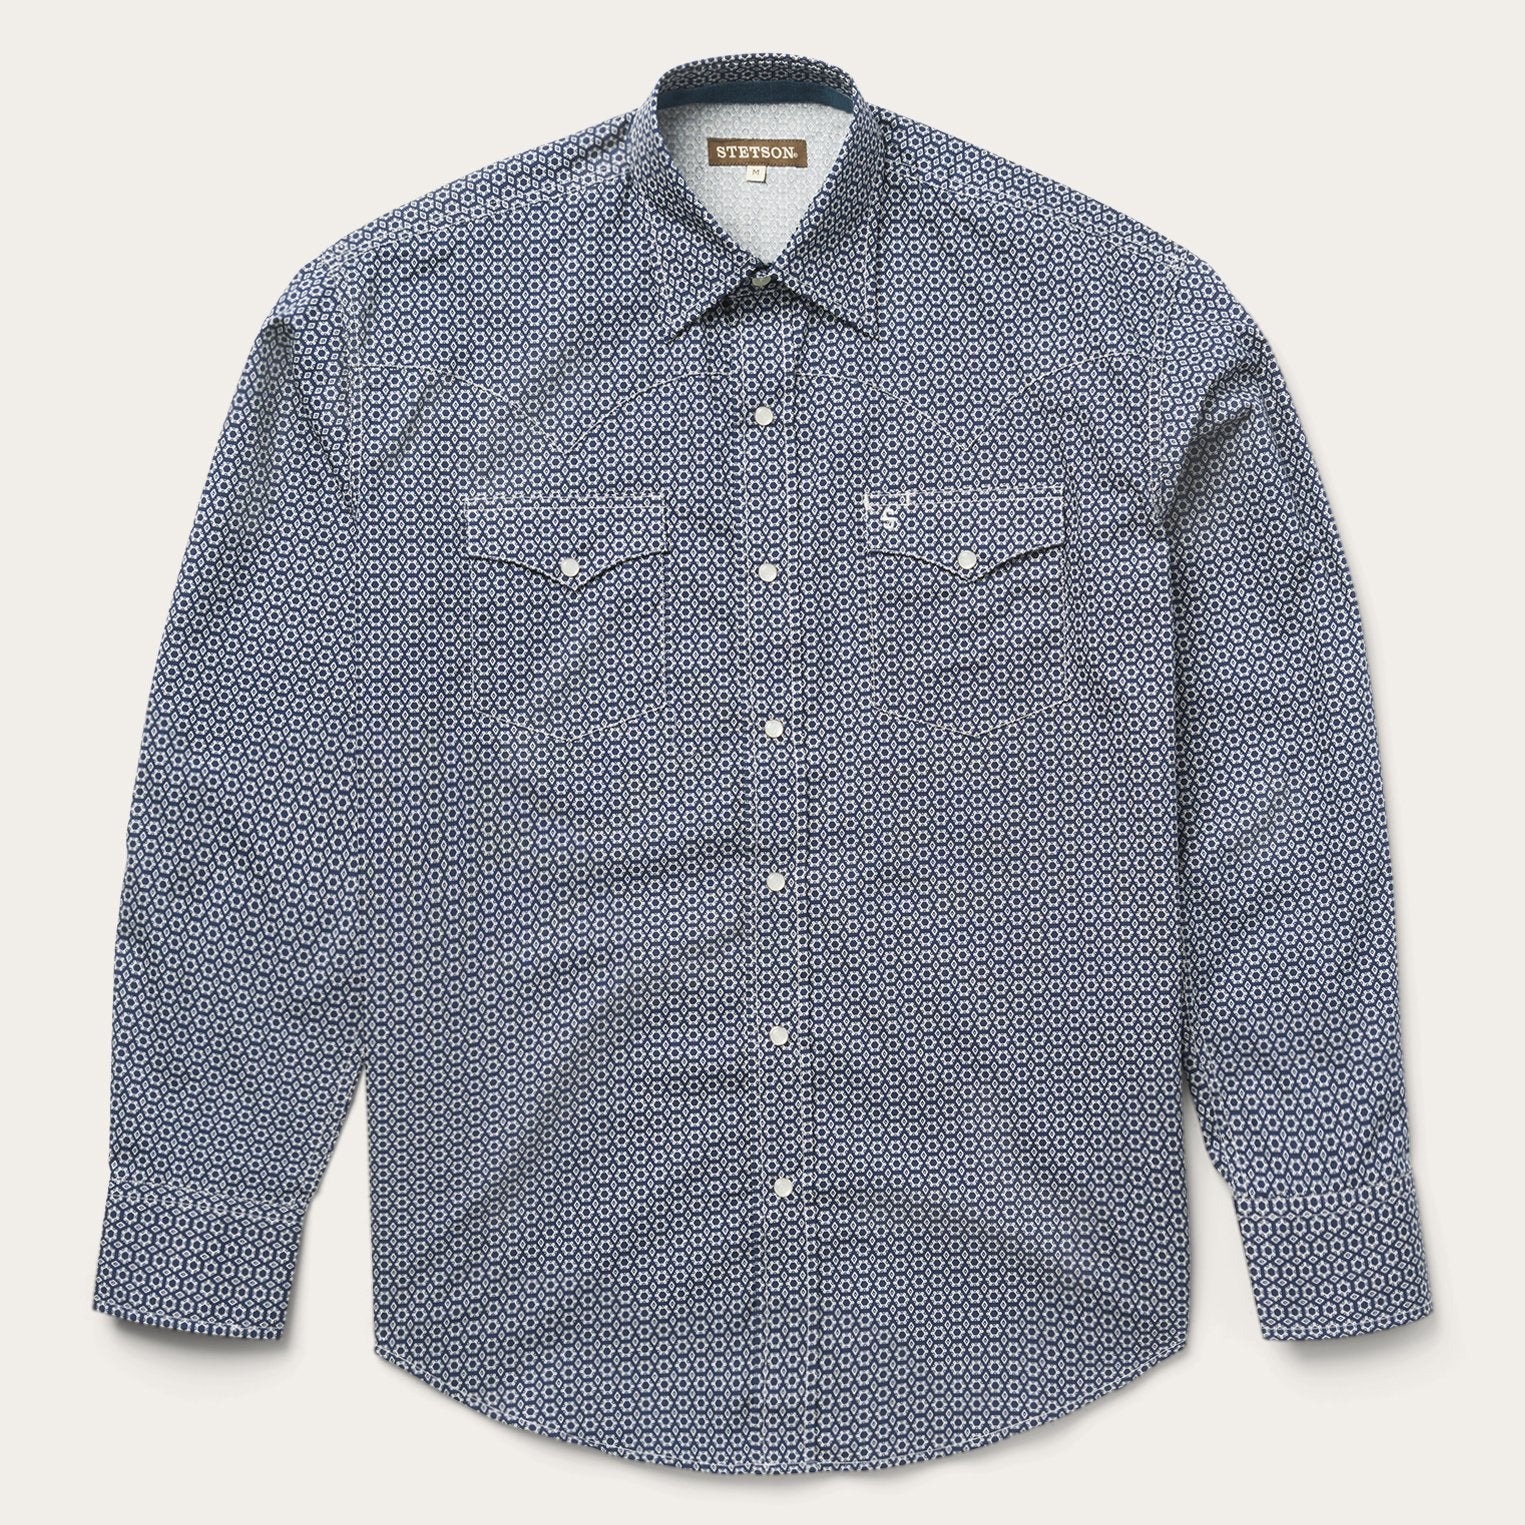 Stetson Snap Front Shirt in Deep Blue | Clothing | Flyclothing LLC